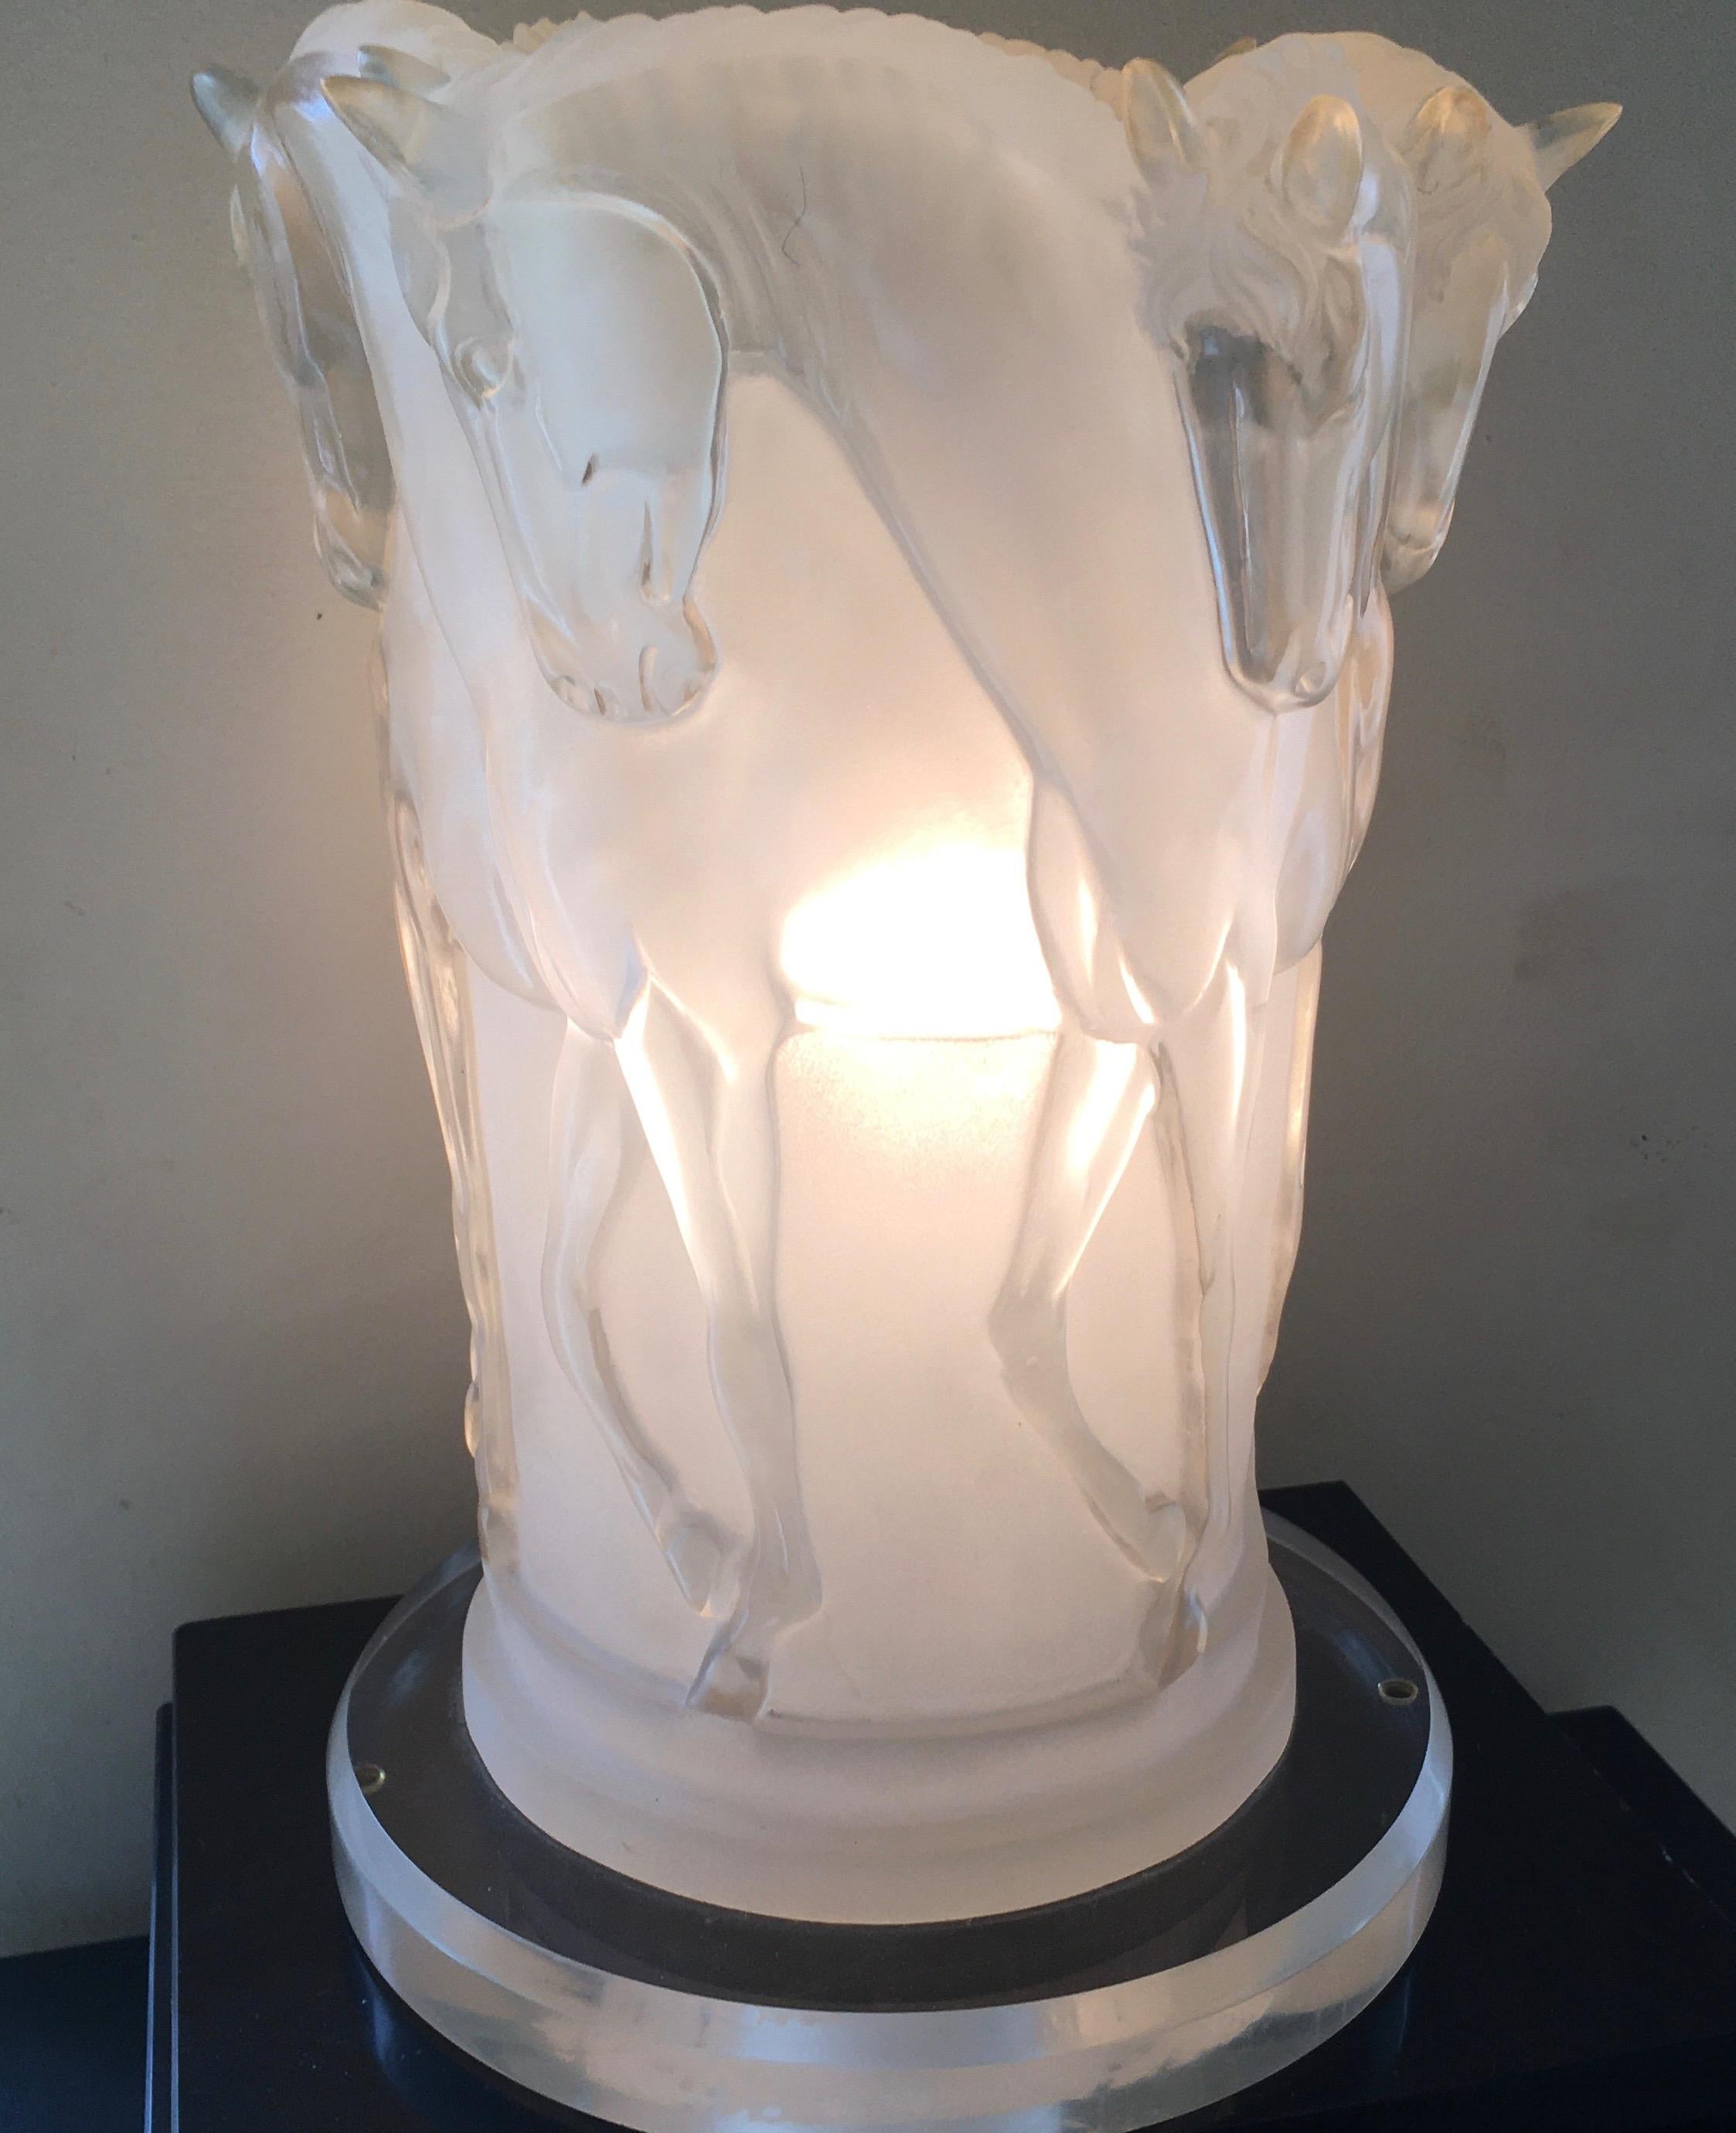 Art Deco Opalescant Resin Lamp with a Group of Horses, Italy 2002